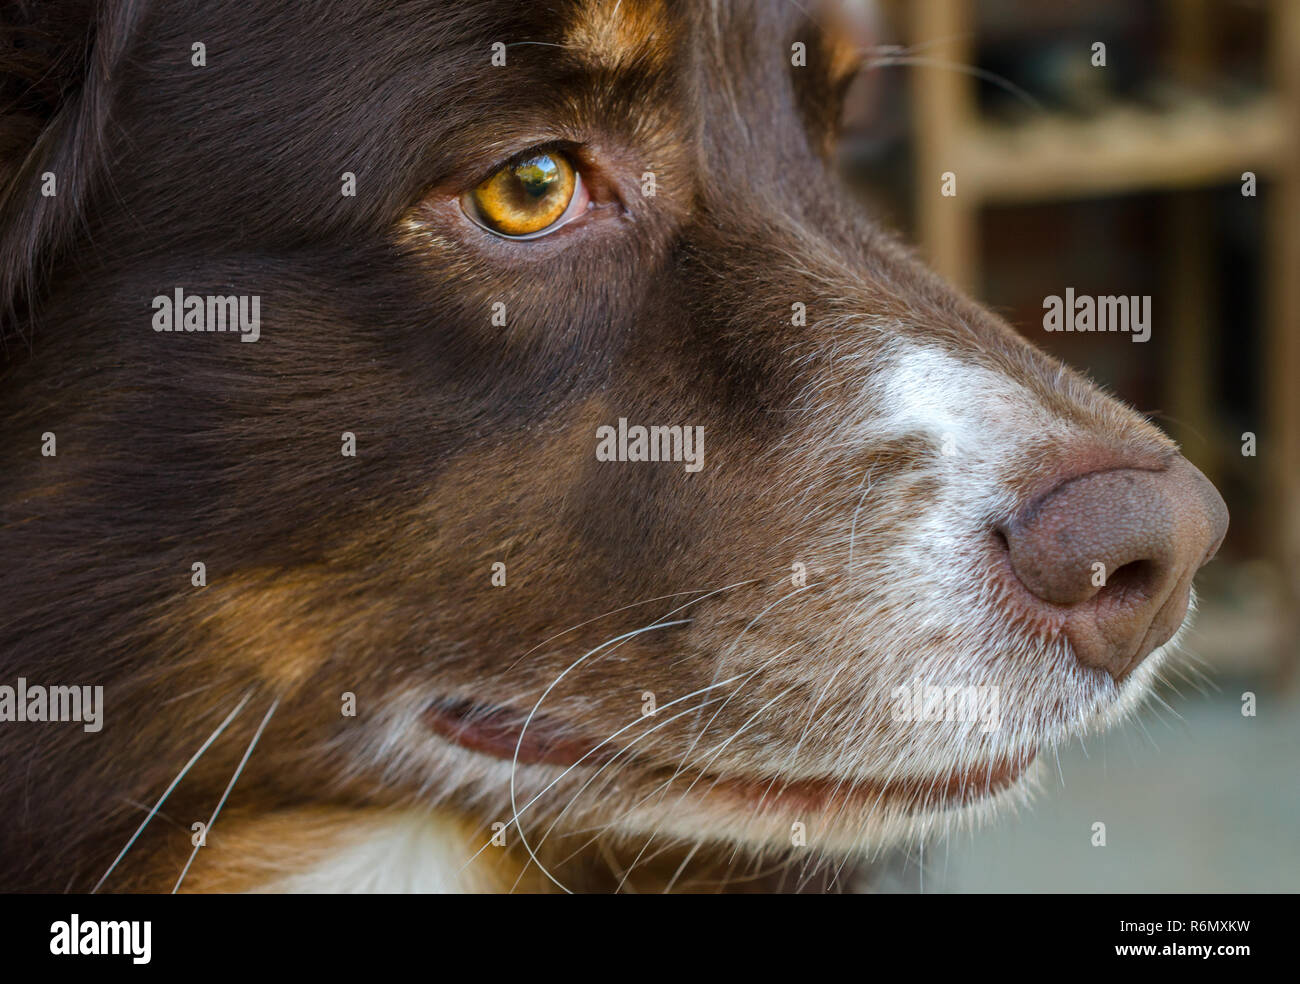 Cowboy, a six-year-old Australian Shepherd dog, is pictured April 11, 2014. Stock Photo